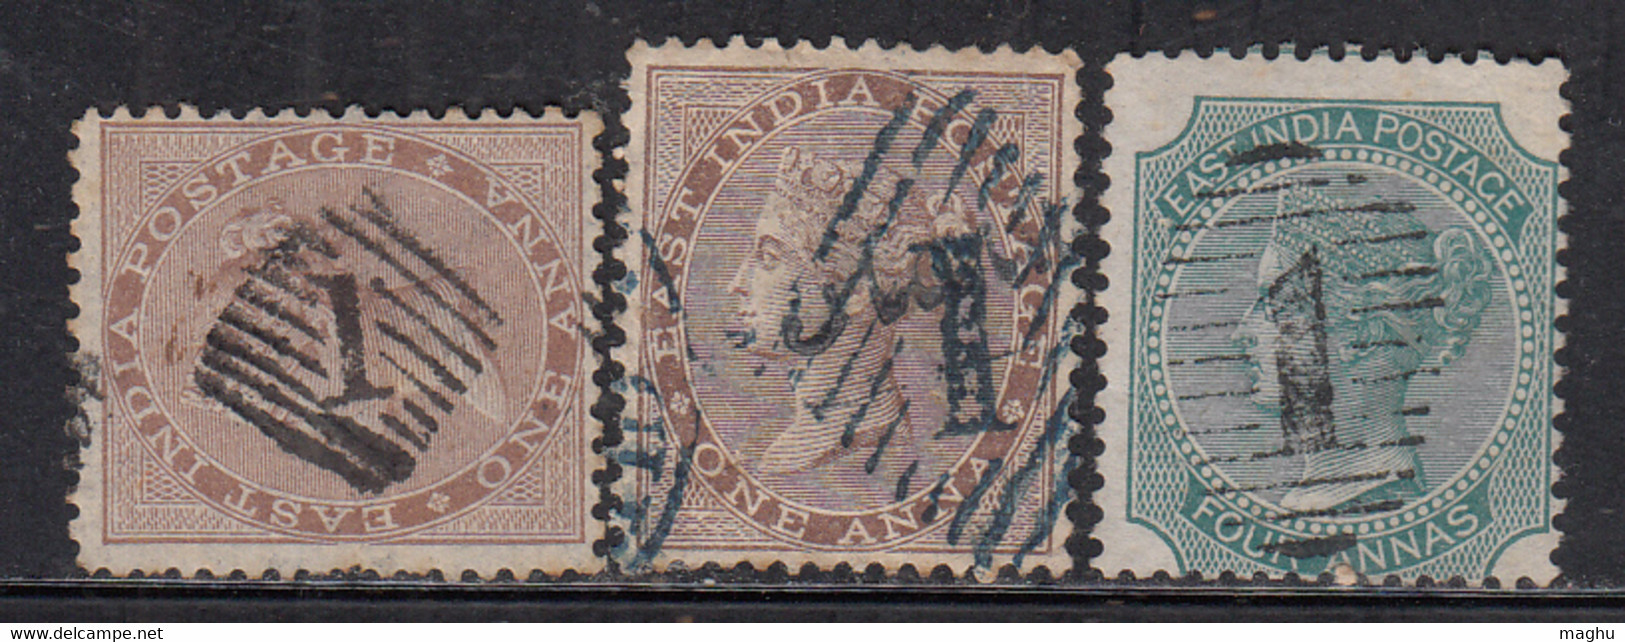 3 Diff., Varities Of Bombay, Local, Cooper / Renouf Type 4 & 15 , British East India Used, Early Indian Cancellations - 1854 East India Company Administration